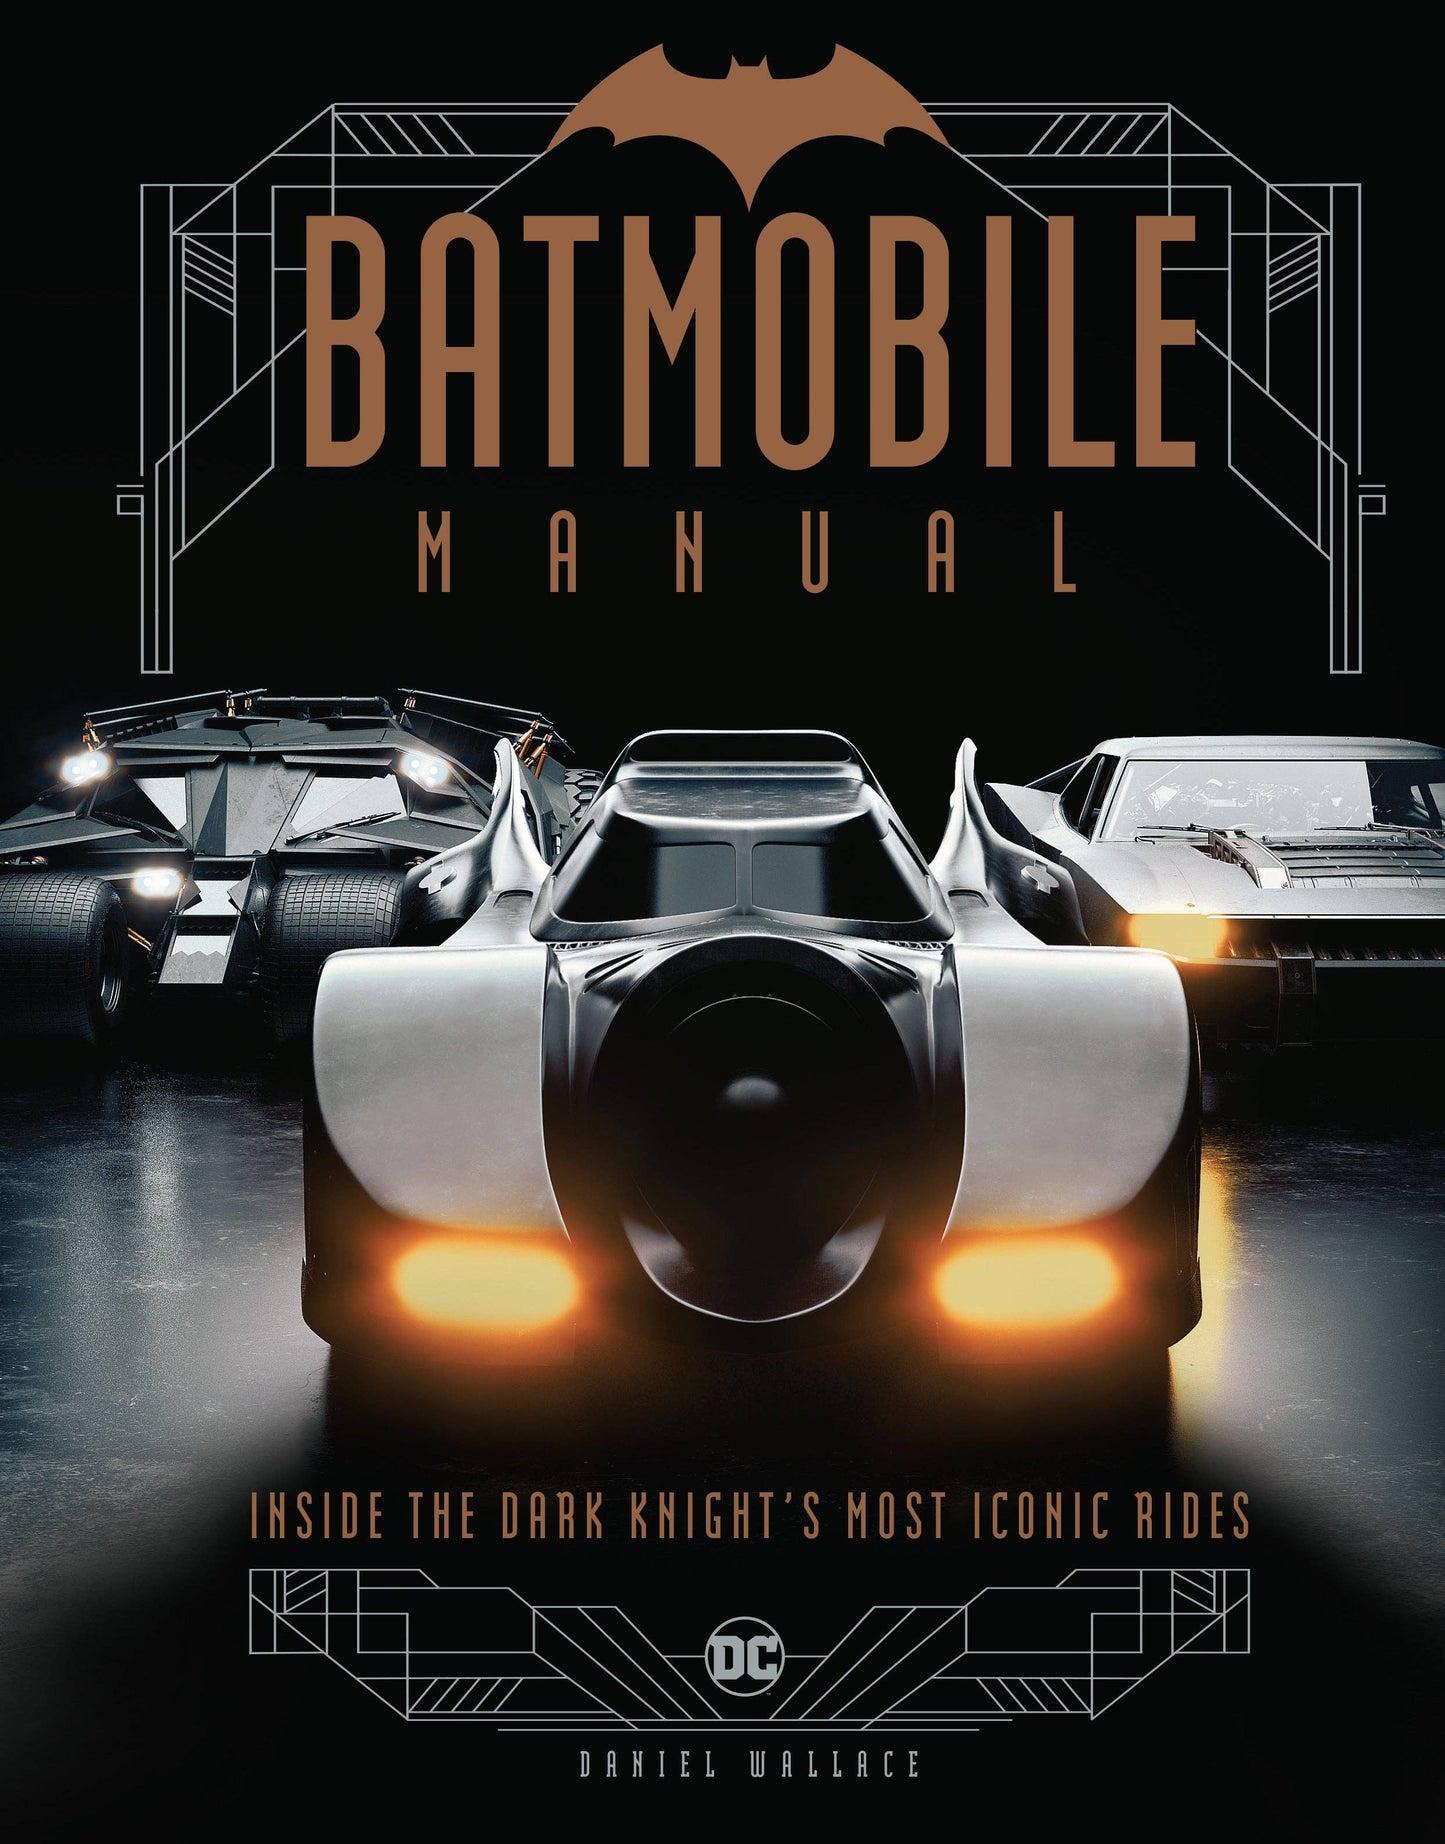 Batmobile Manual Inside the Dark Knights Most Iconic Rides DC Book 